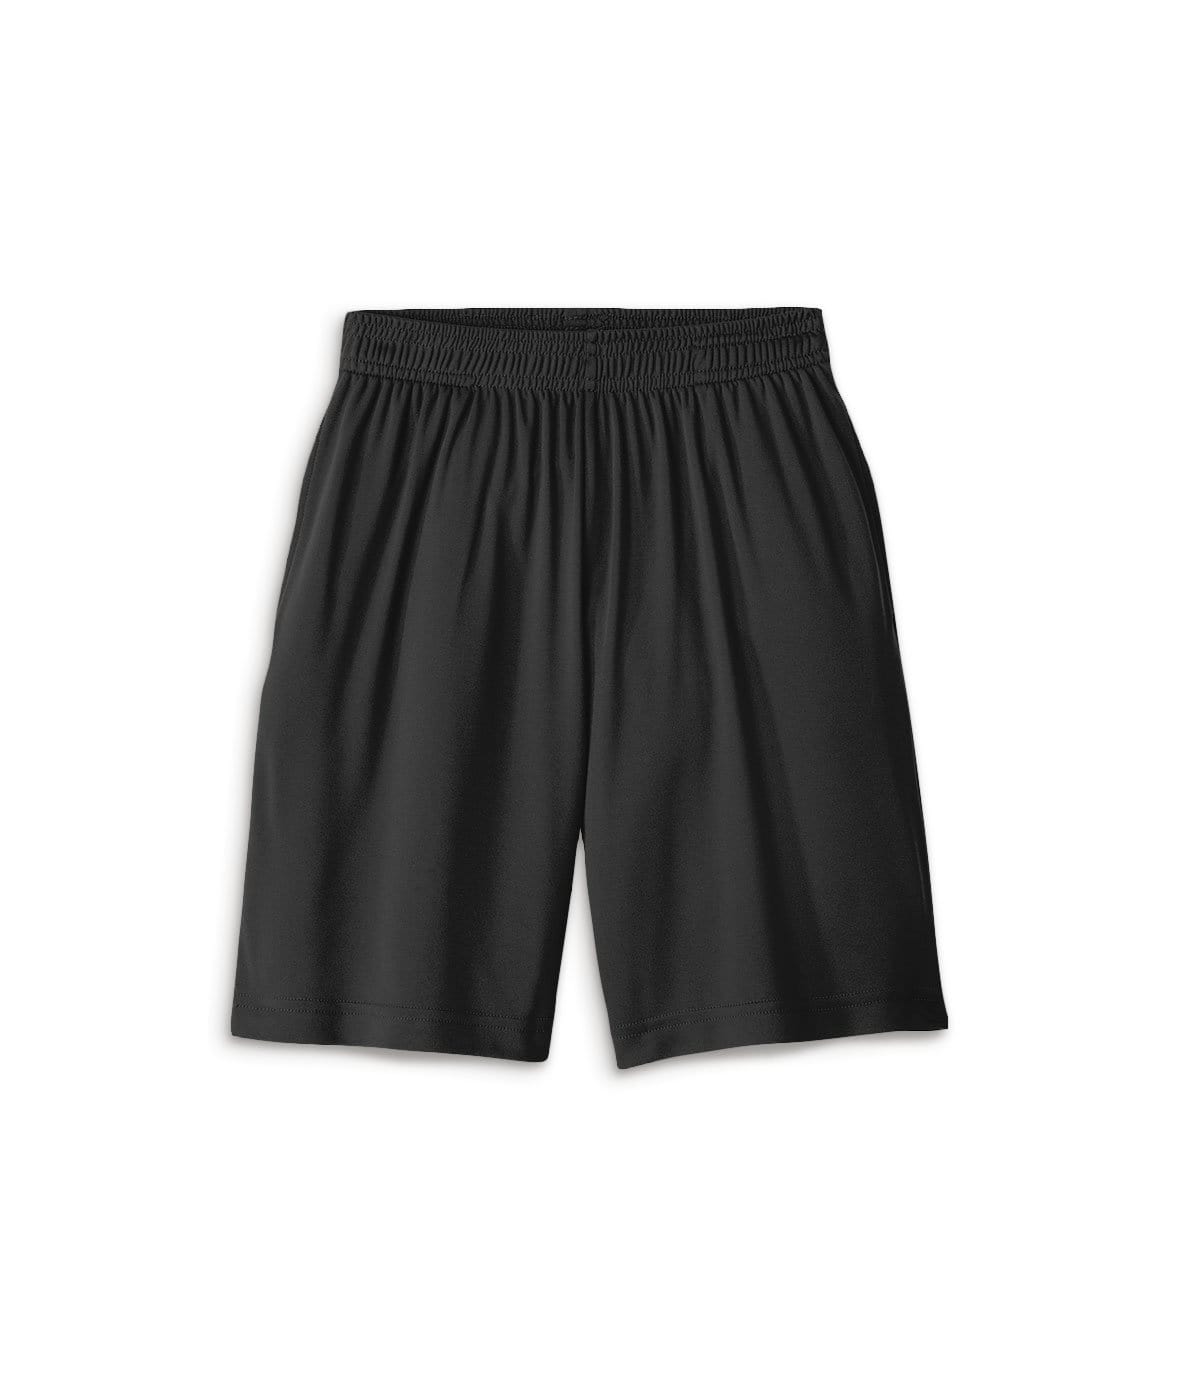 Nayked Apparel Men Men's Ridiculously Soft Pocketed Performance Shorts